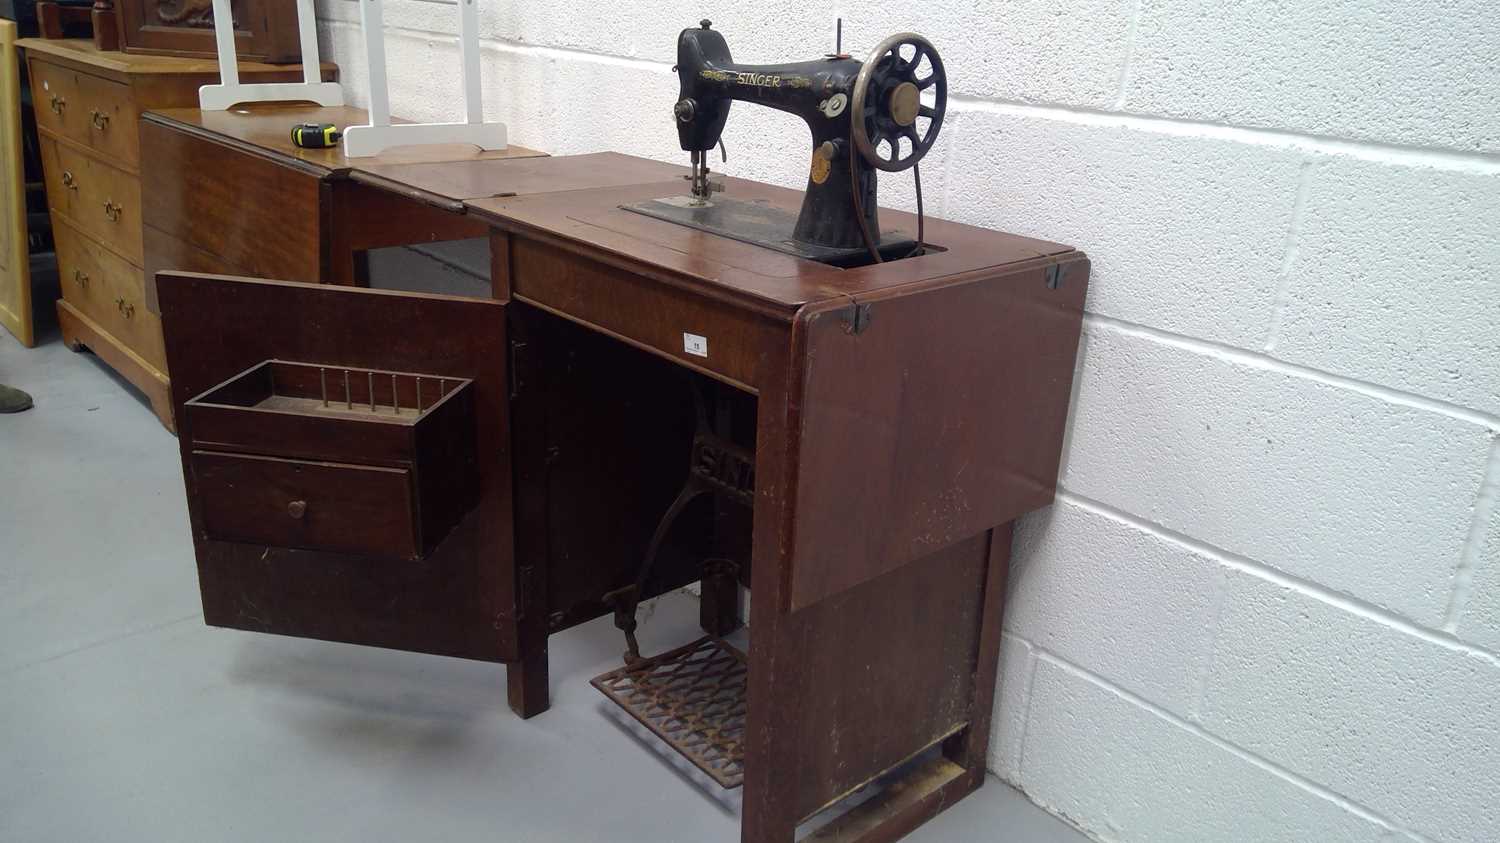 Lot 15 - Singer sewing machine and table, cast iron frame